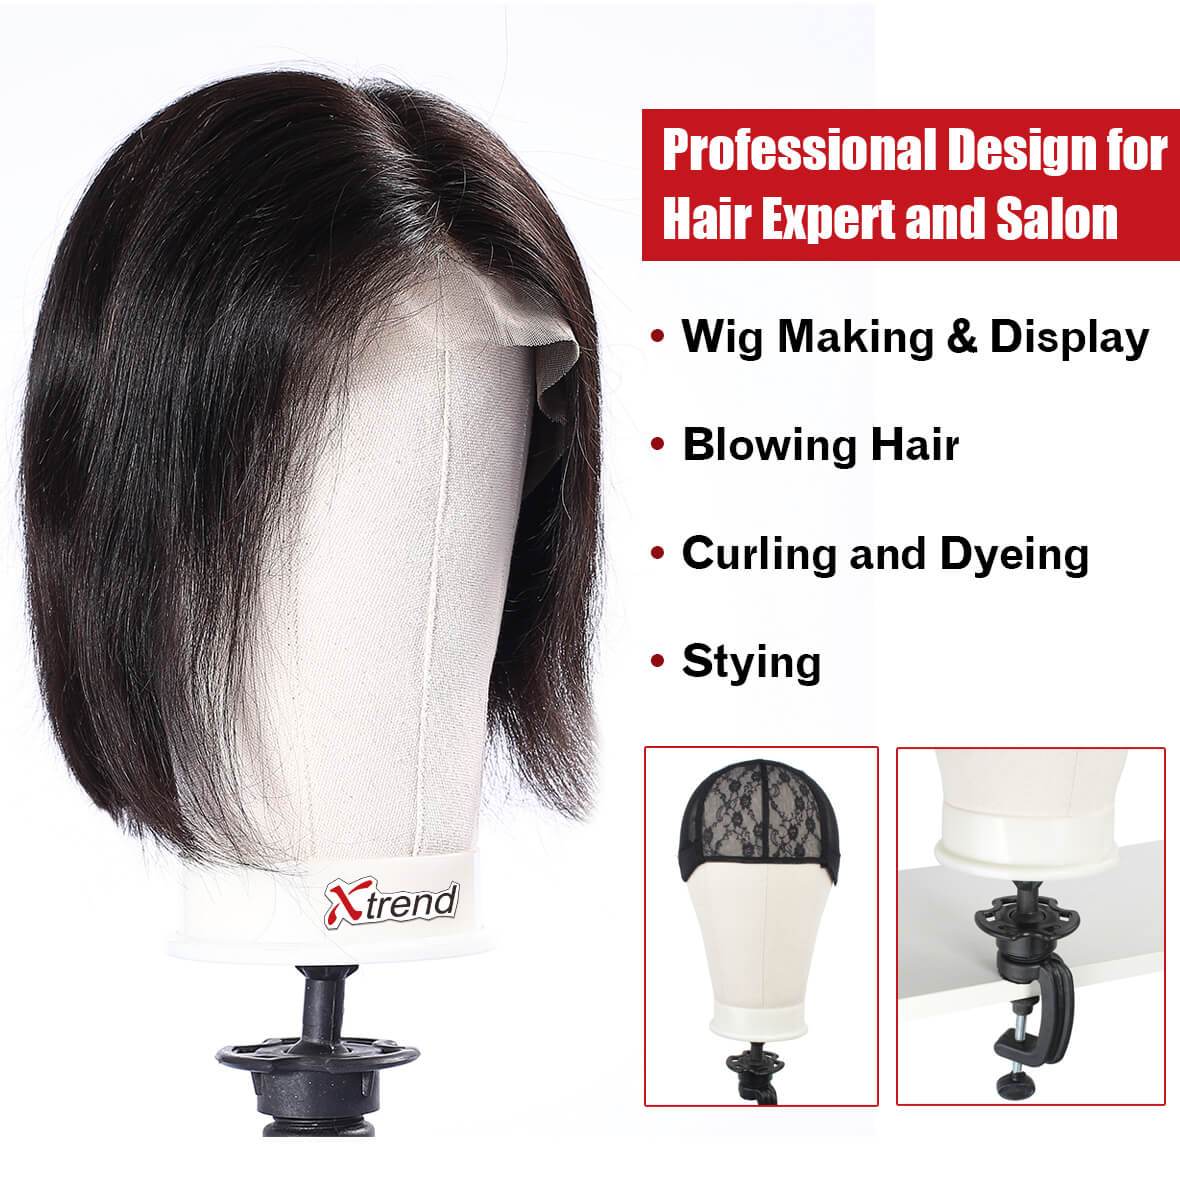 21-24 Inch Canvas Head for Wigs with Stand Display Styling Mannequin Head for Making Wig/Head Weft/Hair Extension